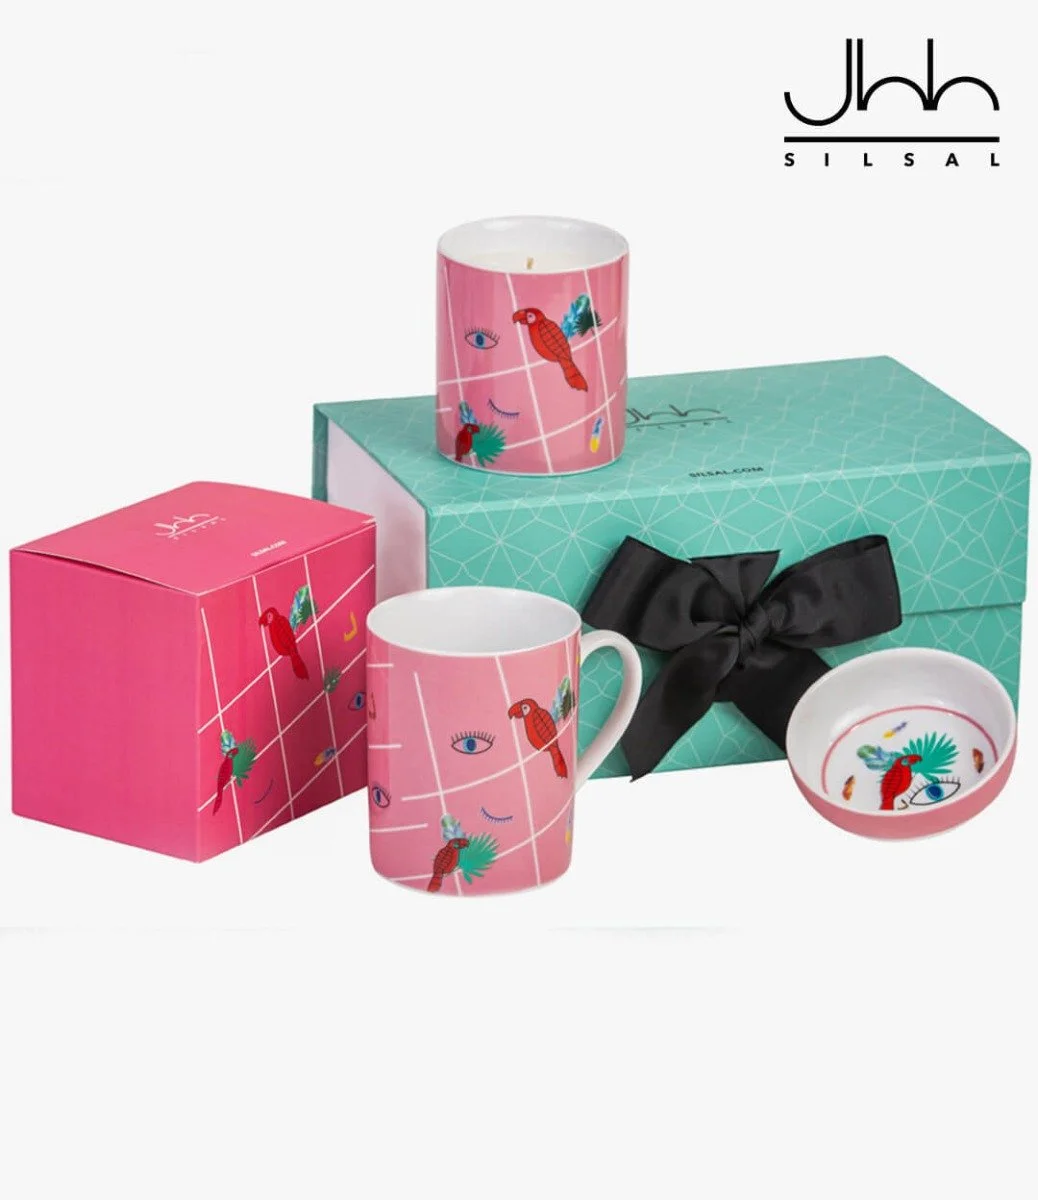 Think Pink Gift Box By Silsal*